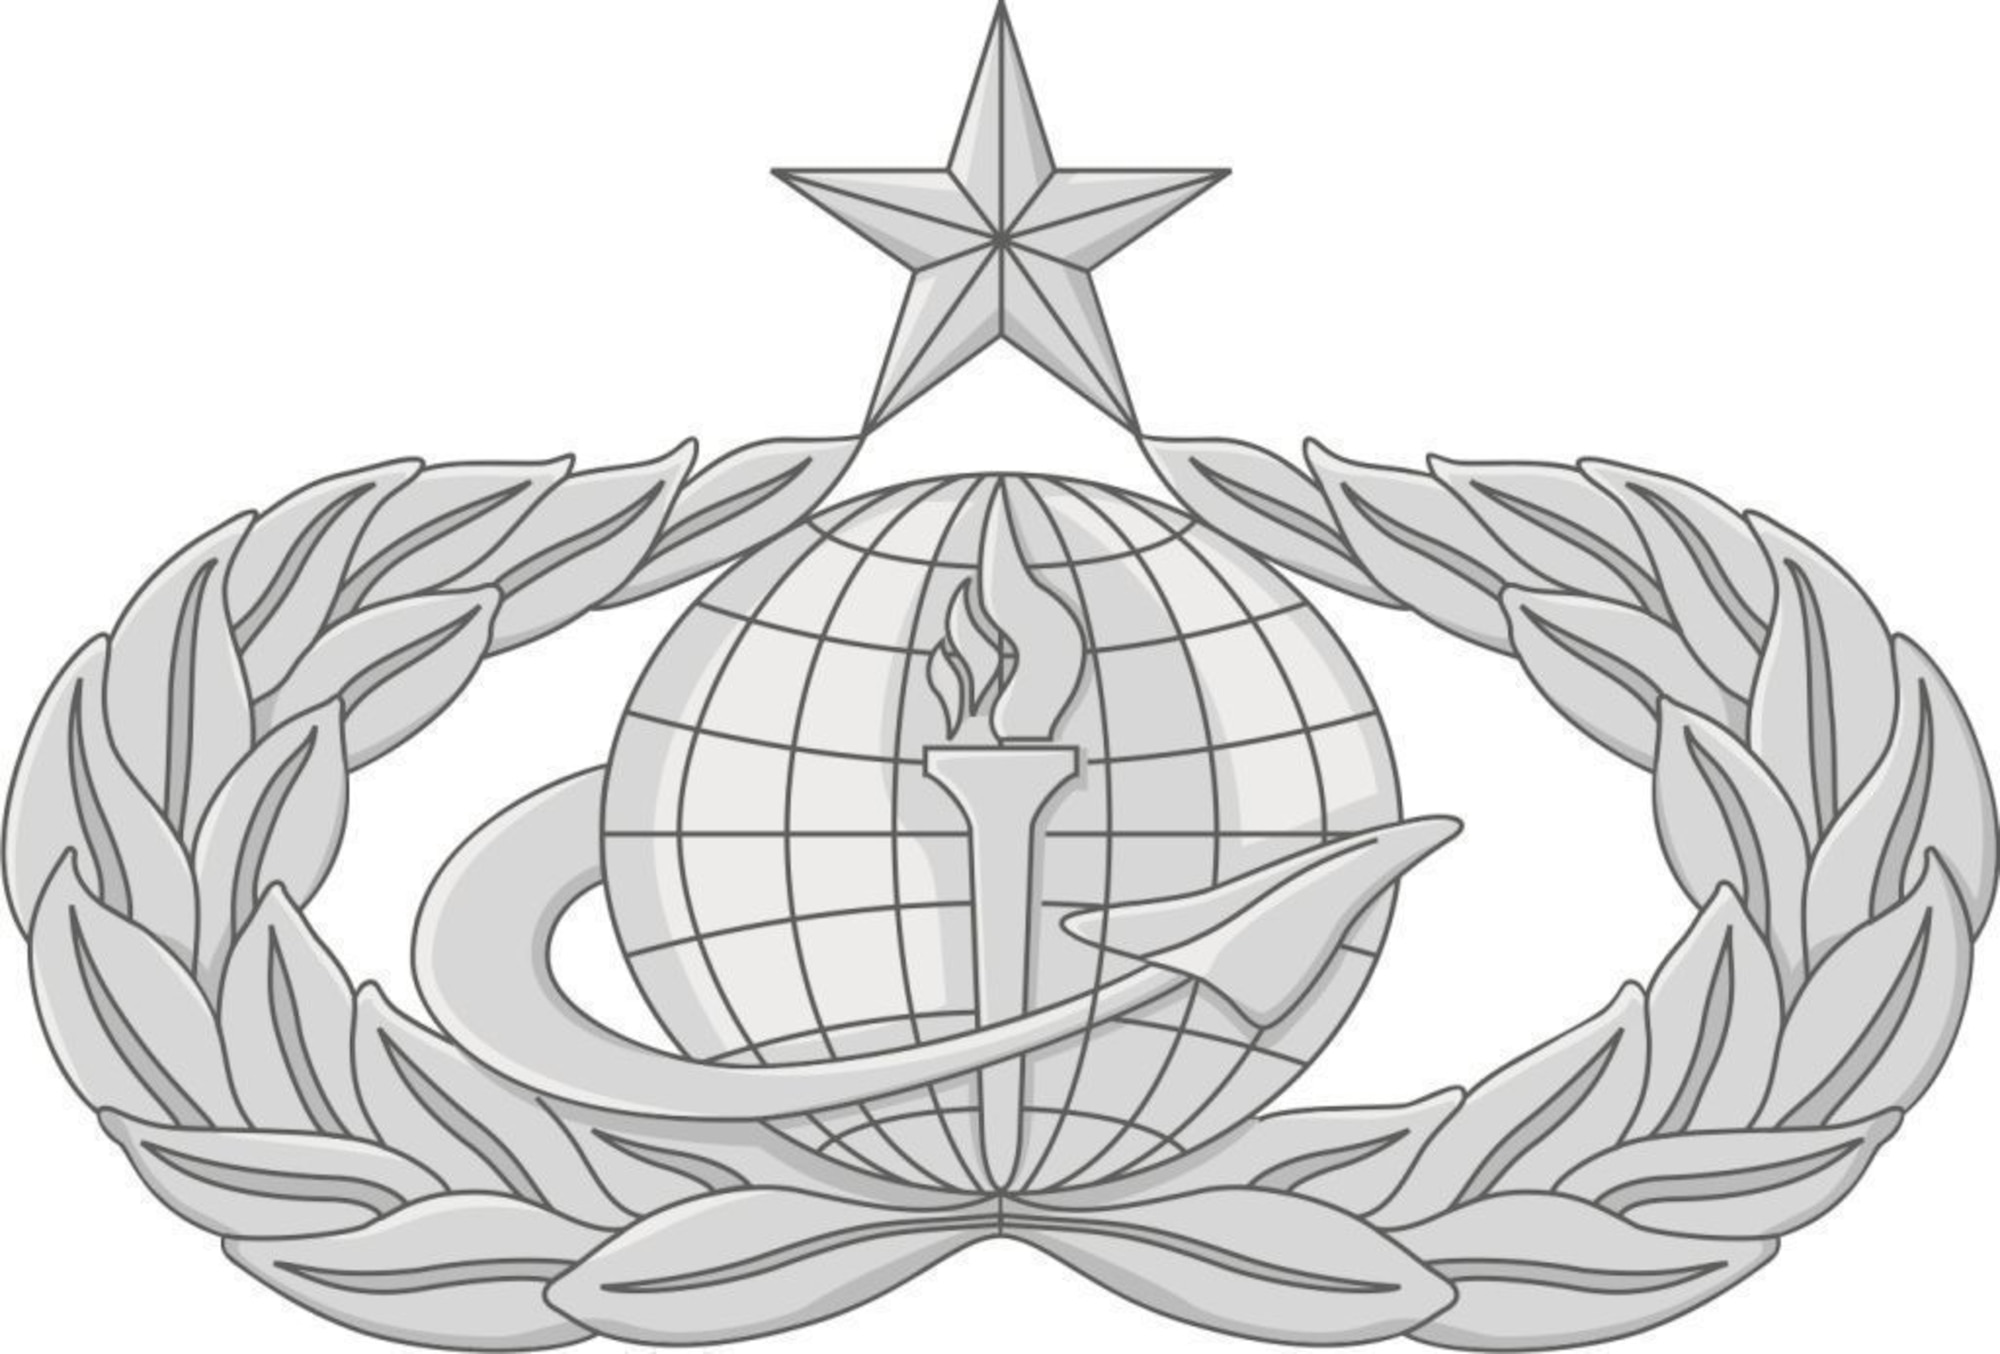 The occupational badge for the new 38F Force Support Air Force Specialty Code incorporates the torch from the services badge and the delta from the manpower and personnel badge. Force support officers are now authorized to wear the new badge at the expertise level ? basic, senior (shown) or master - attained in their legacy career field. All FSOs must begin wearing the badge by Aug. 1, 2009. (Graphic by Capt. Thomas Oziemblowsky)